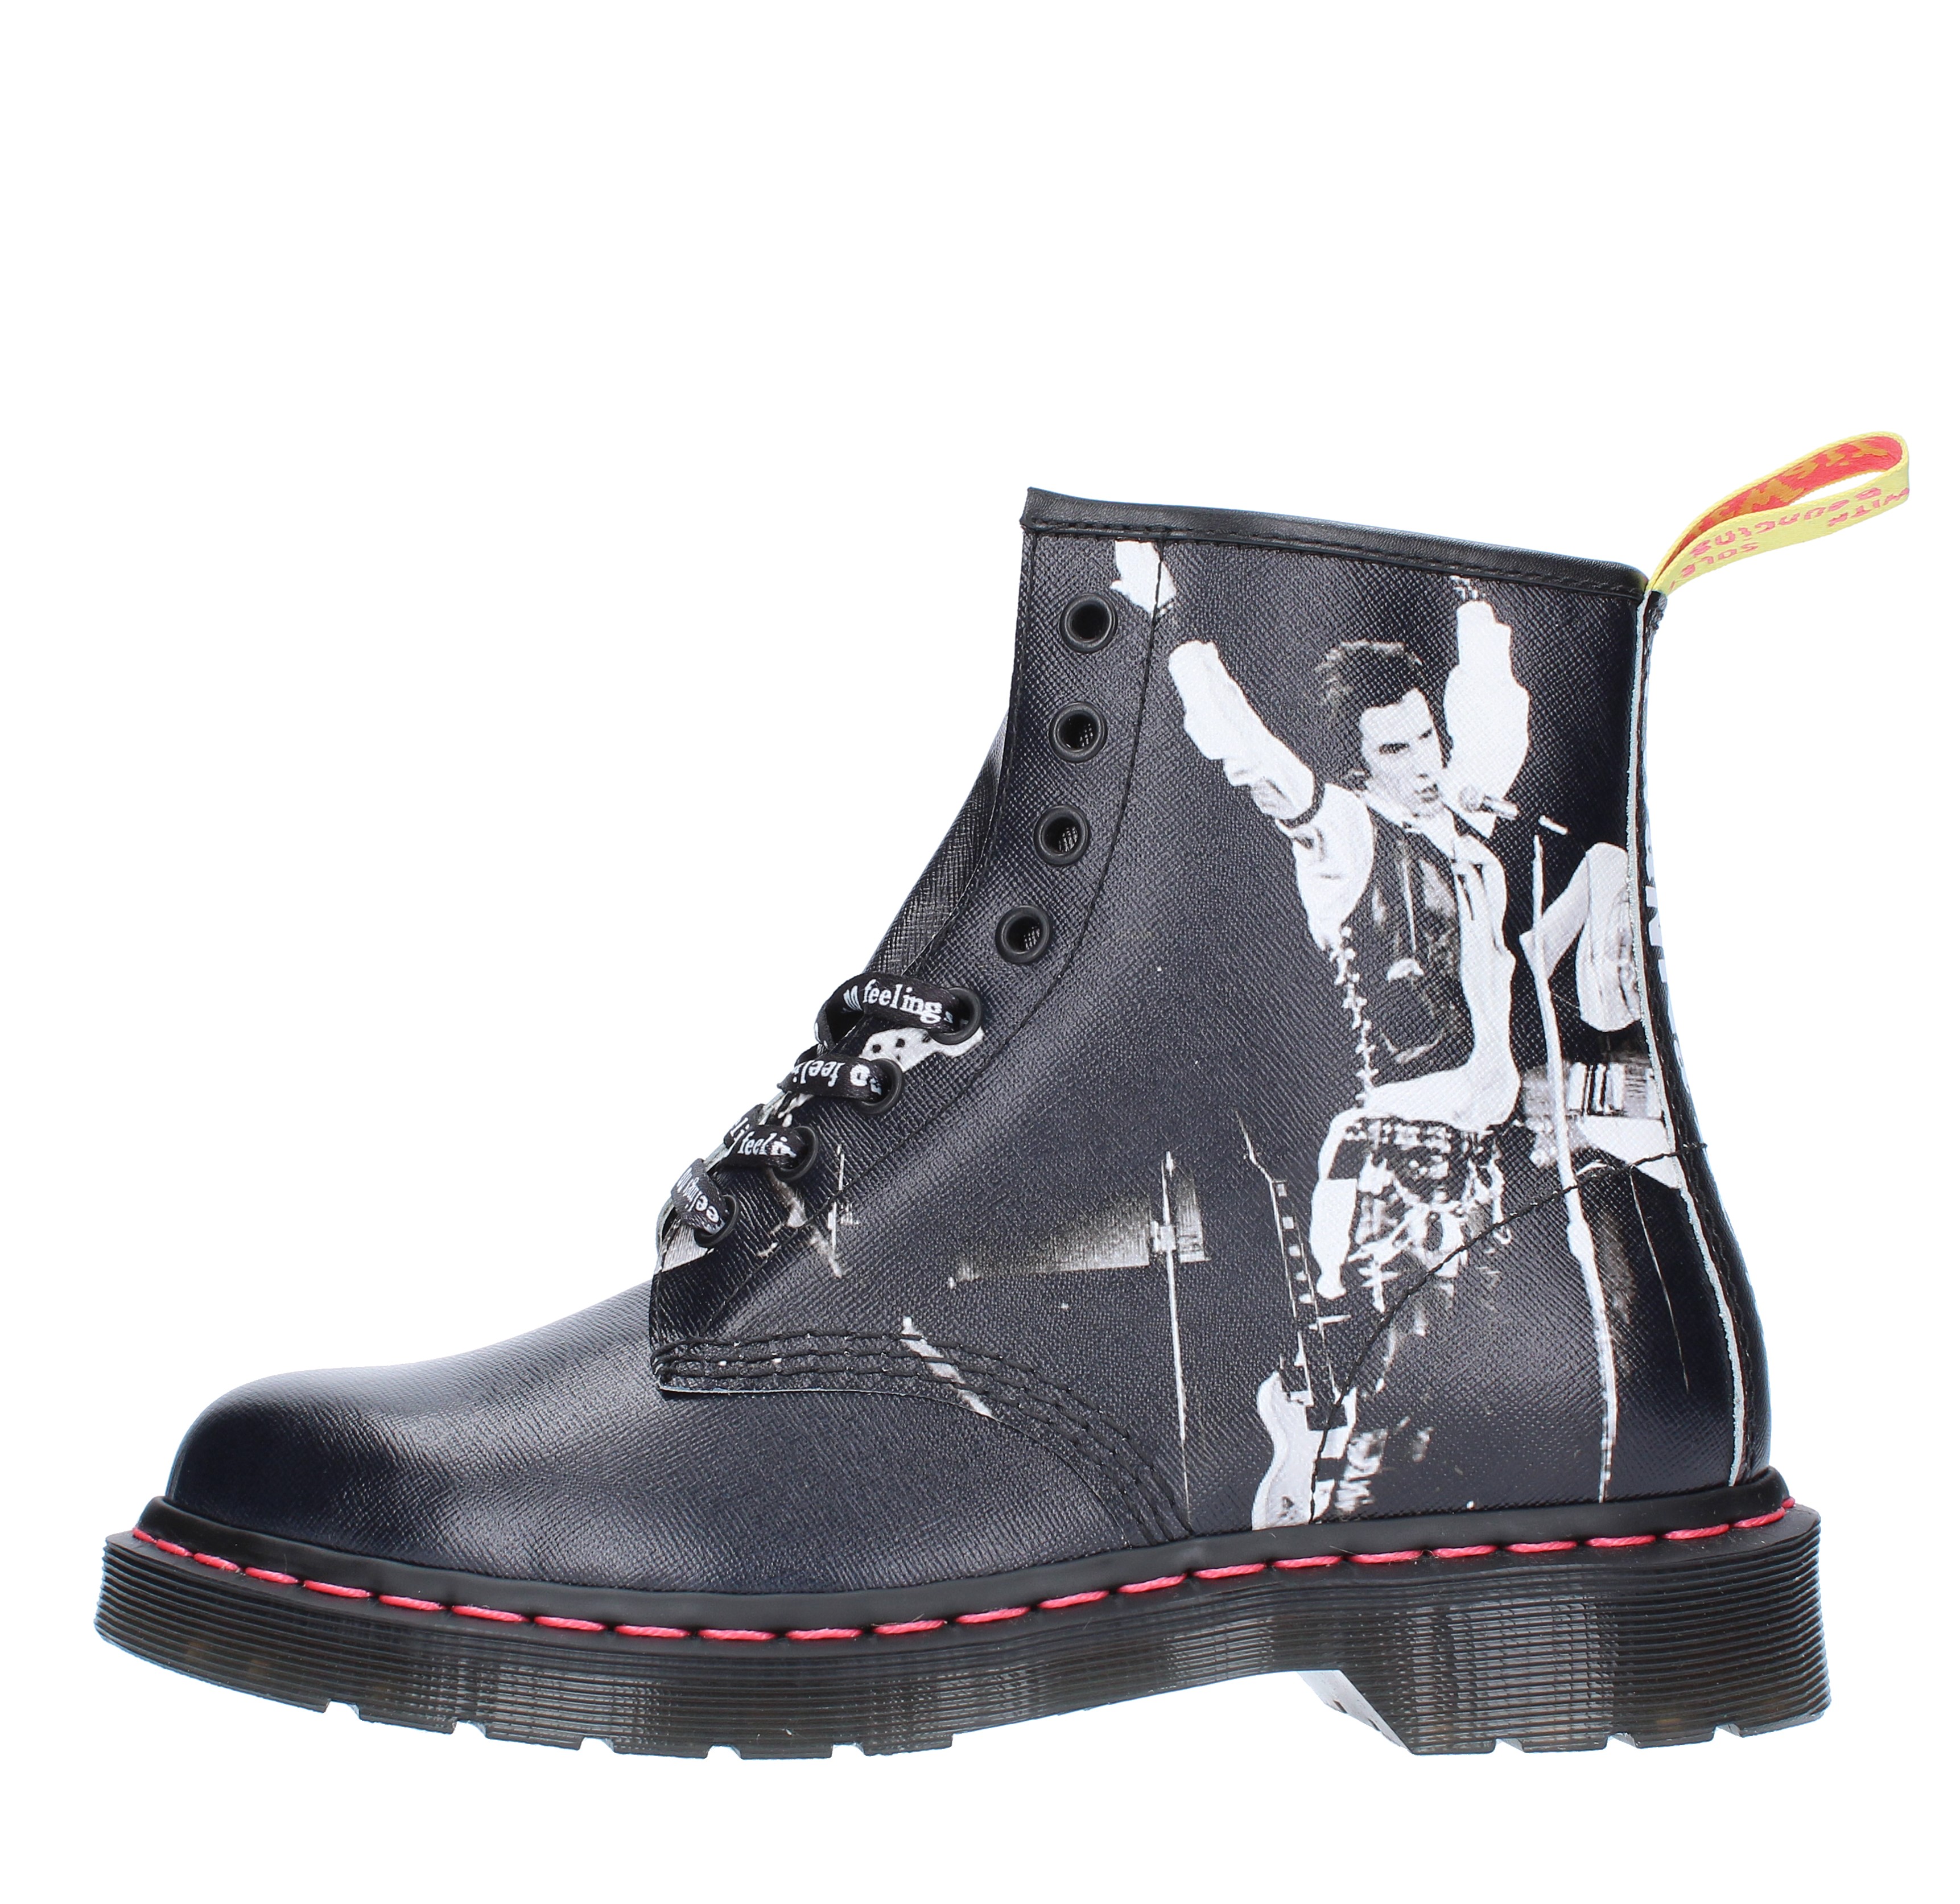 Leather ankle boots - DR. MARTENS - Ginevra calzature